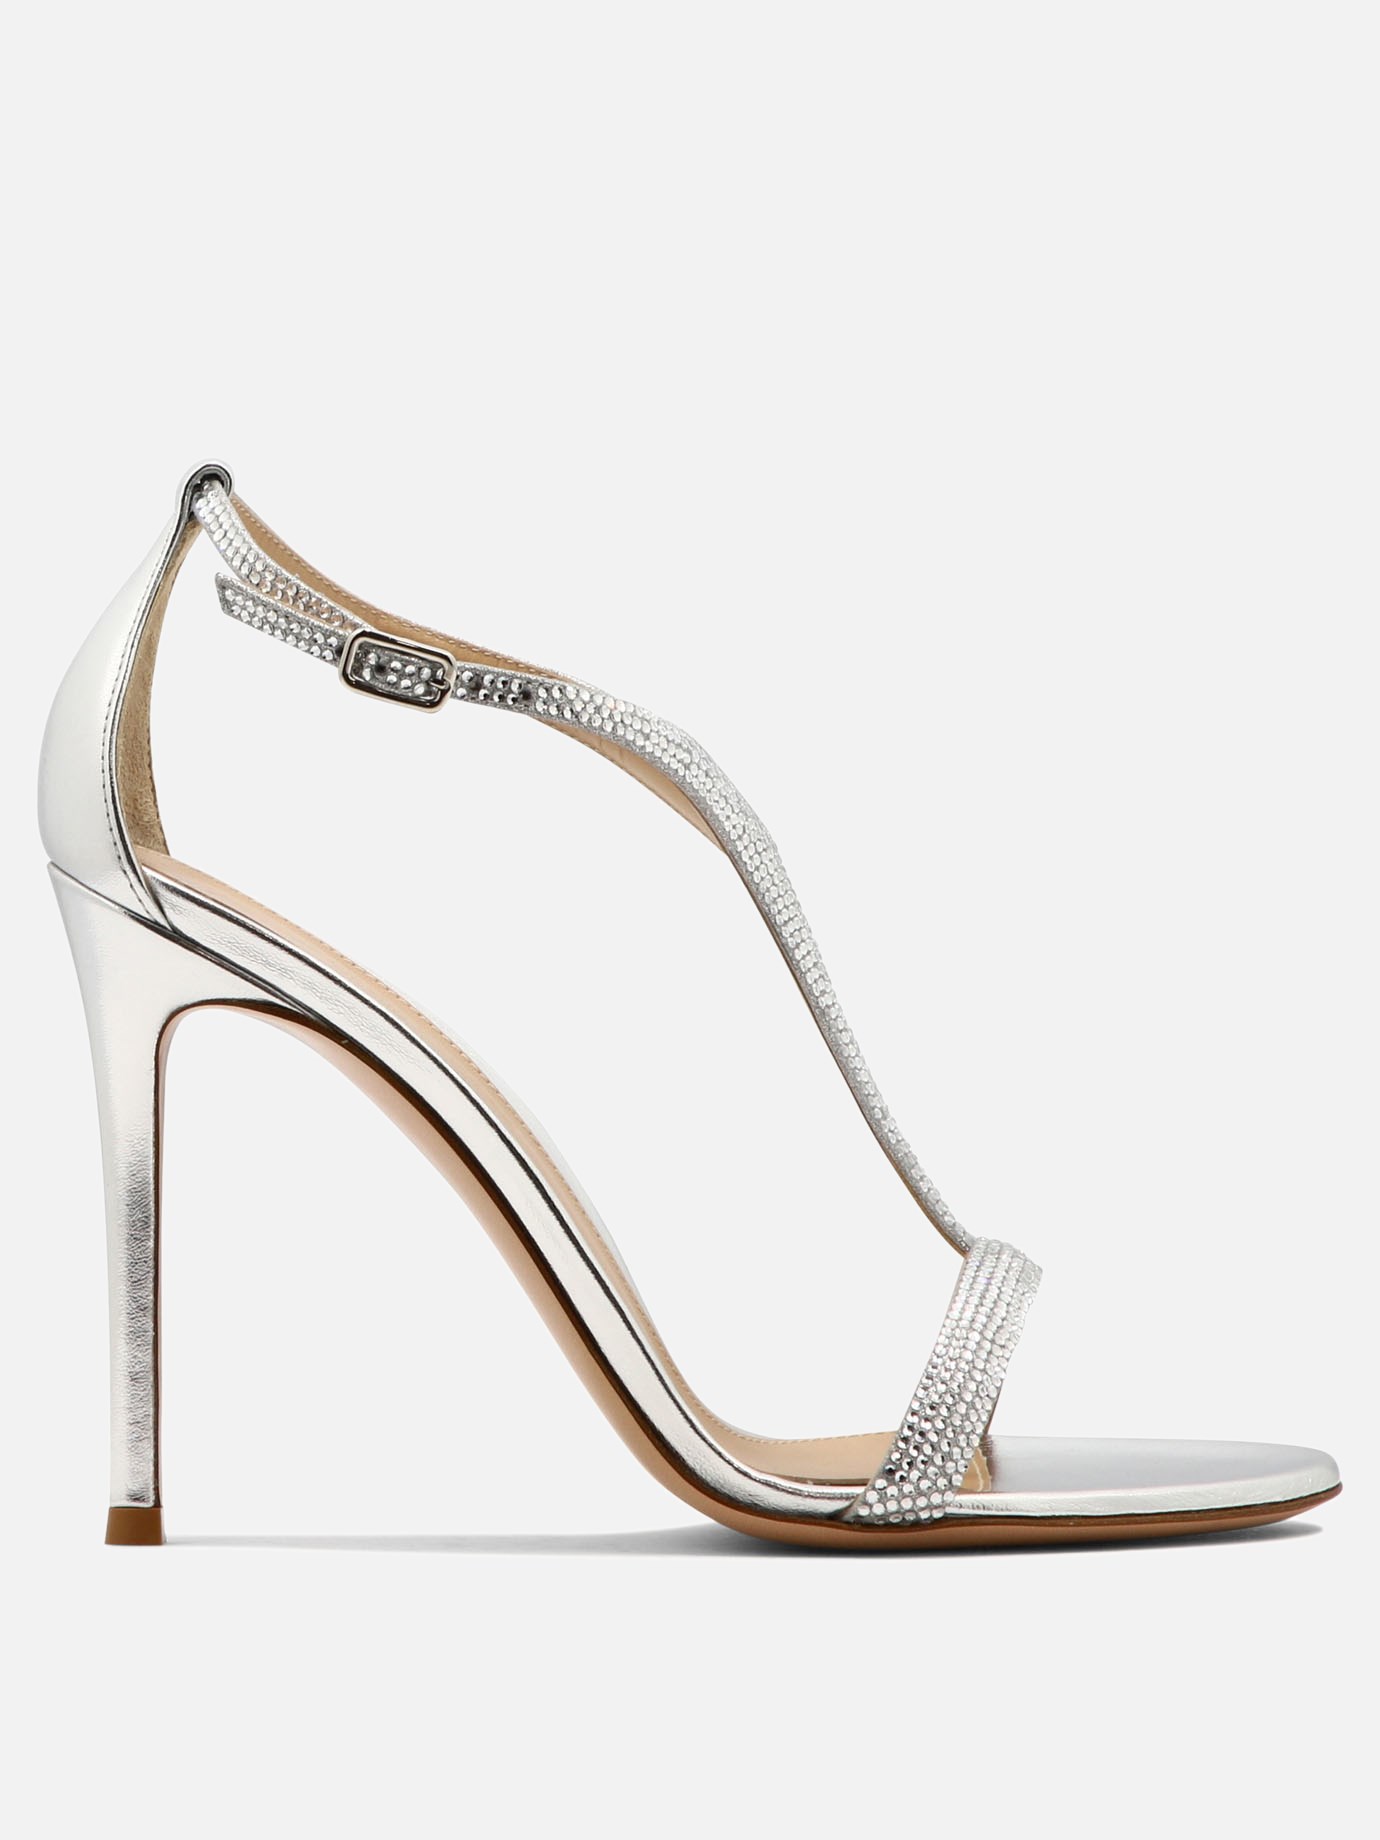 Sandals with crystals by Gianvito Rossi